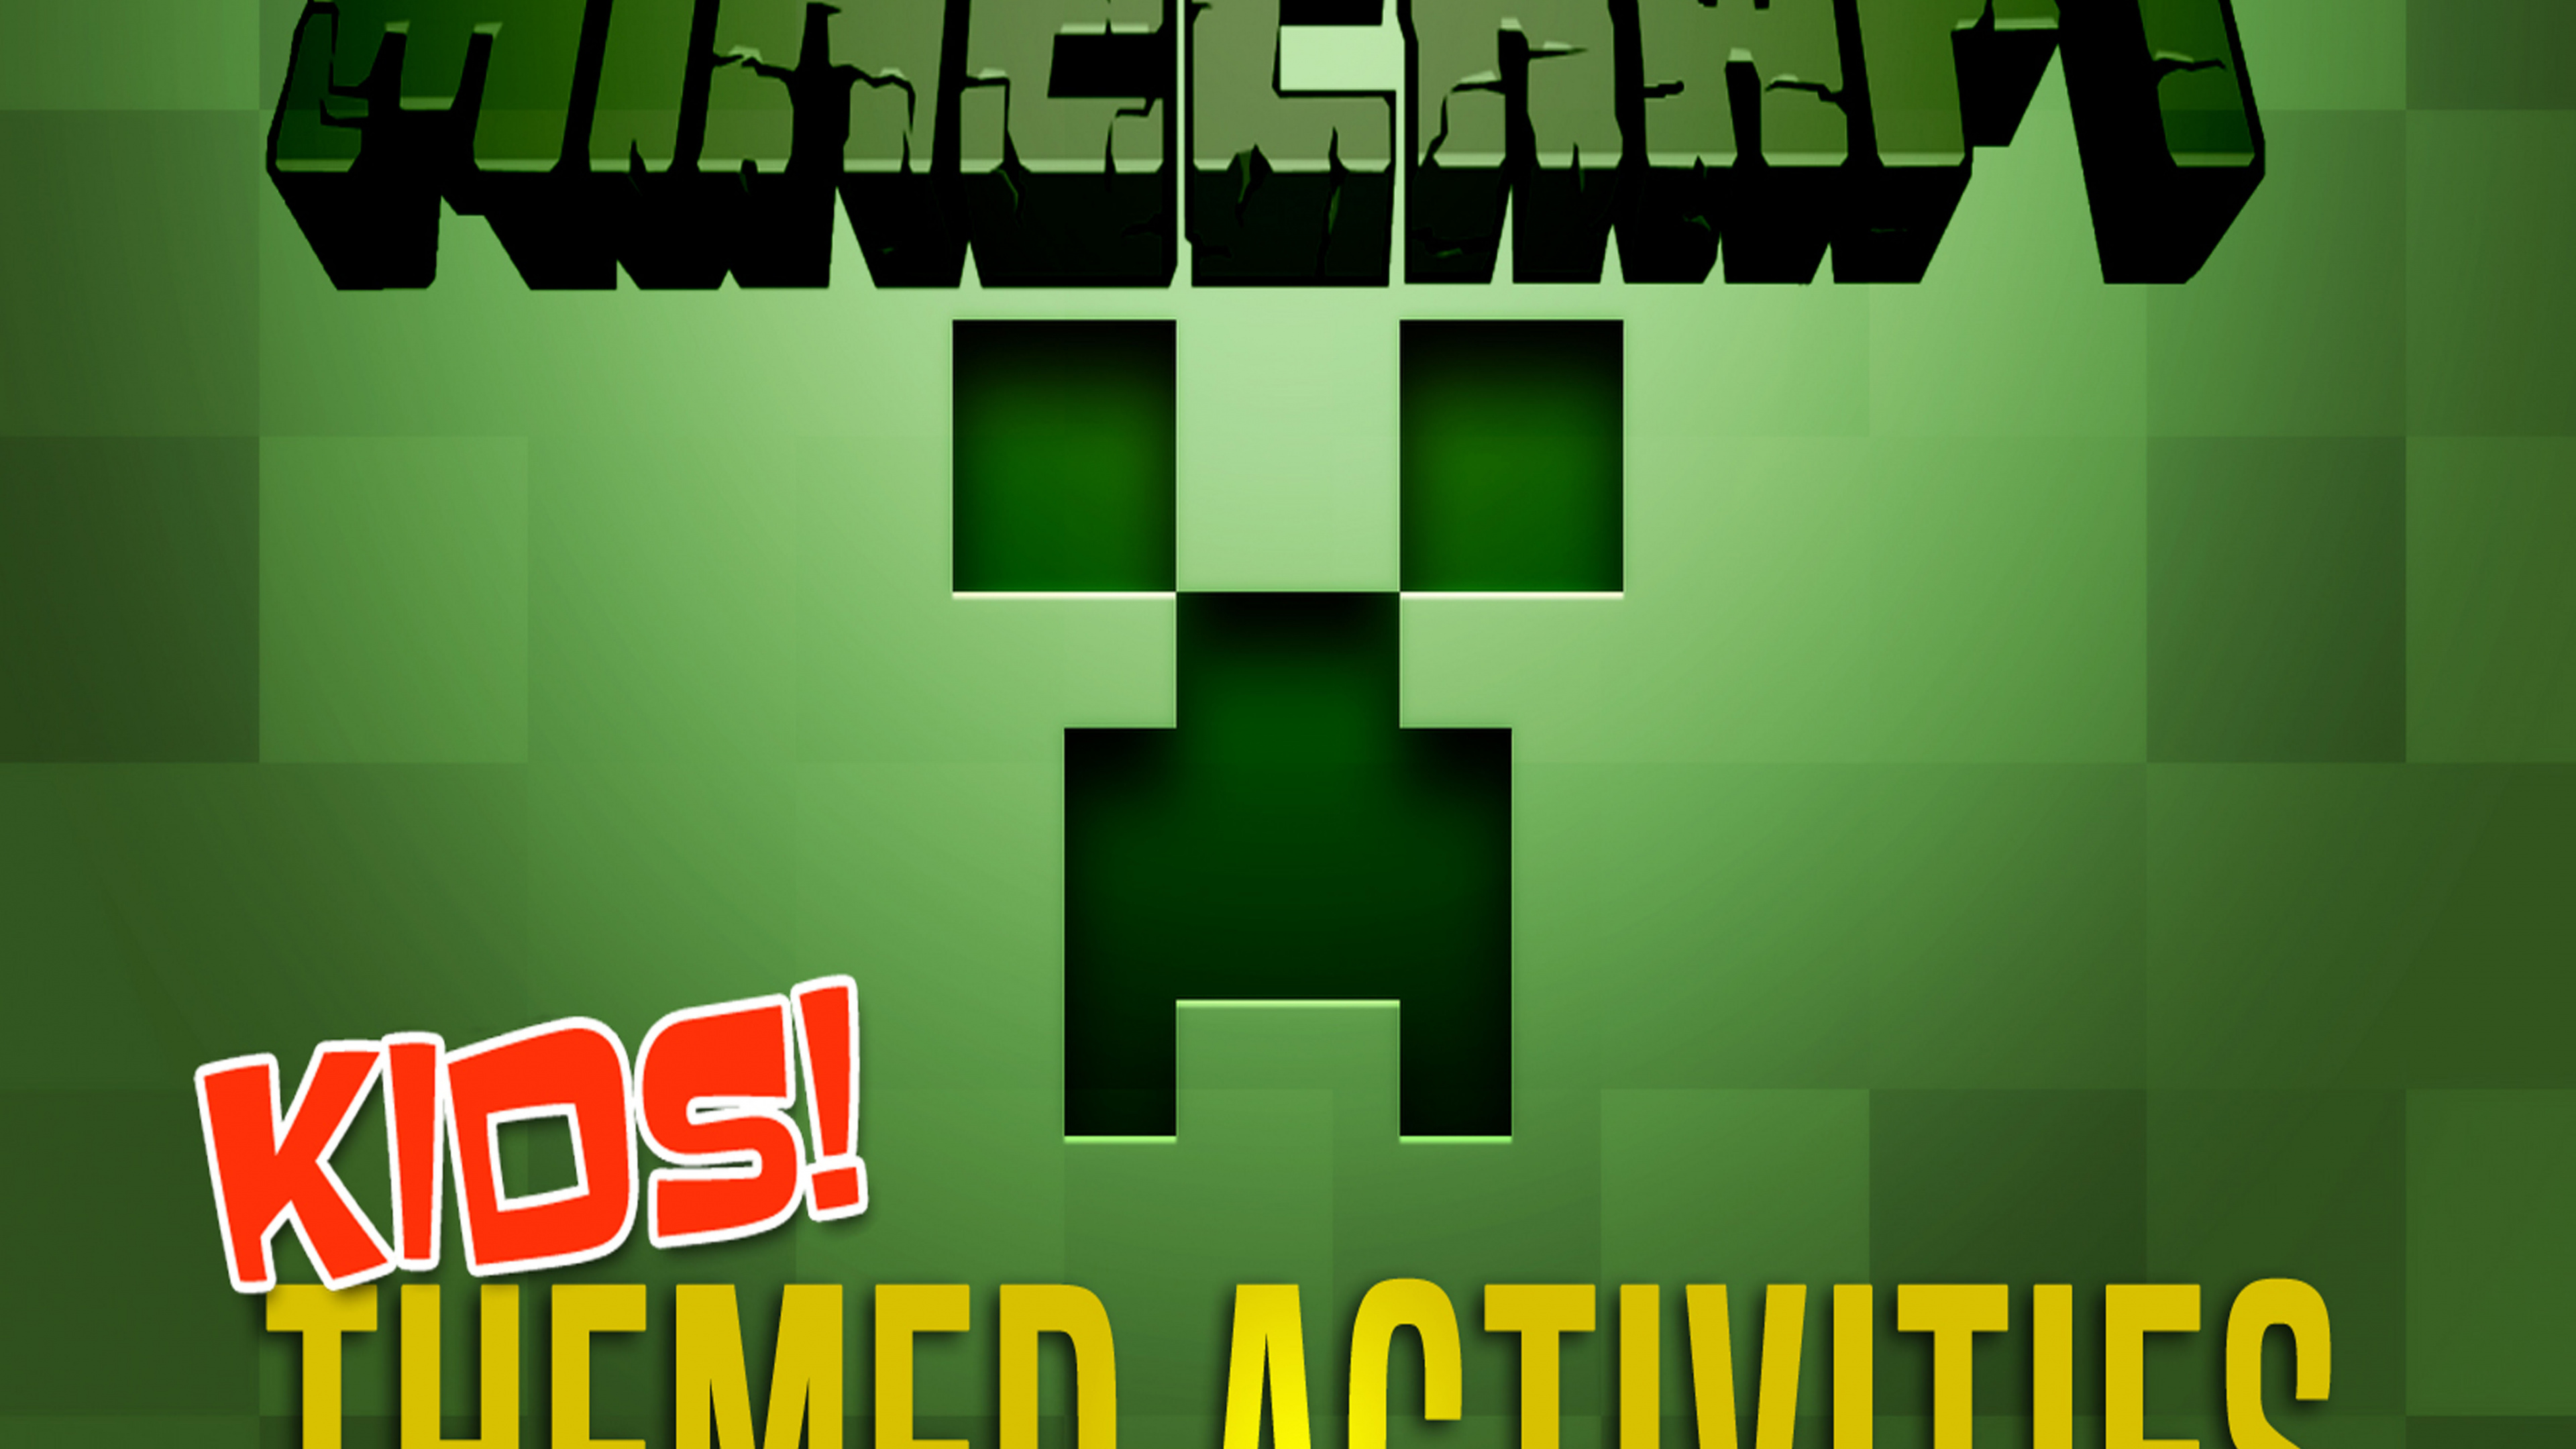 Minecraft, Green, Games, Creeper, Survival Game. Wallpaper in 3840x2160 Resolution